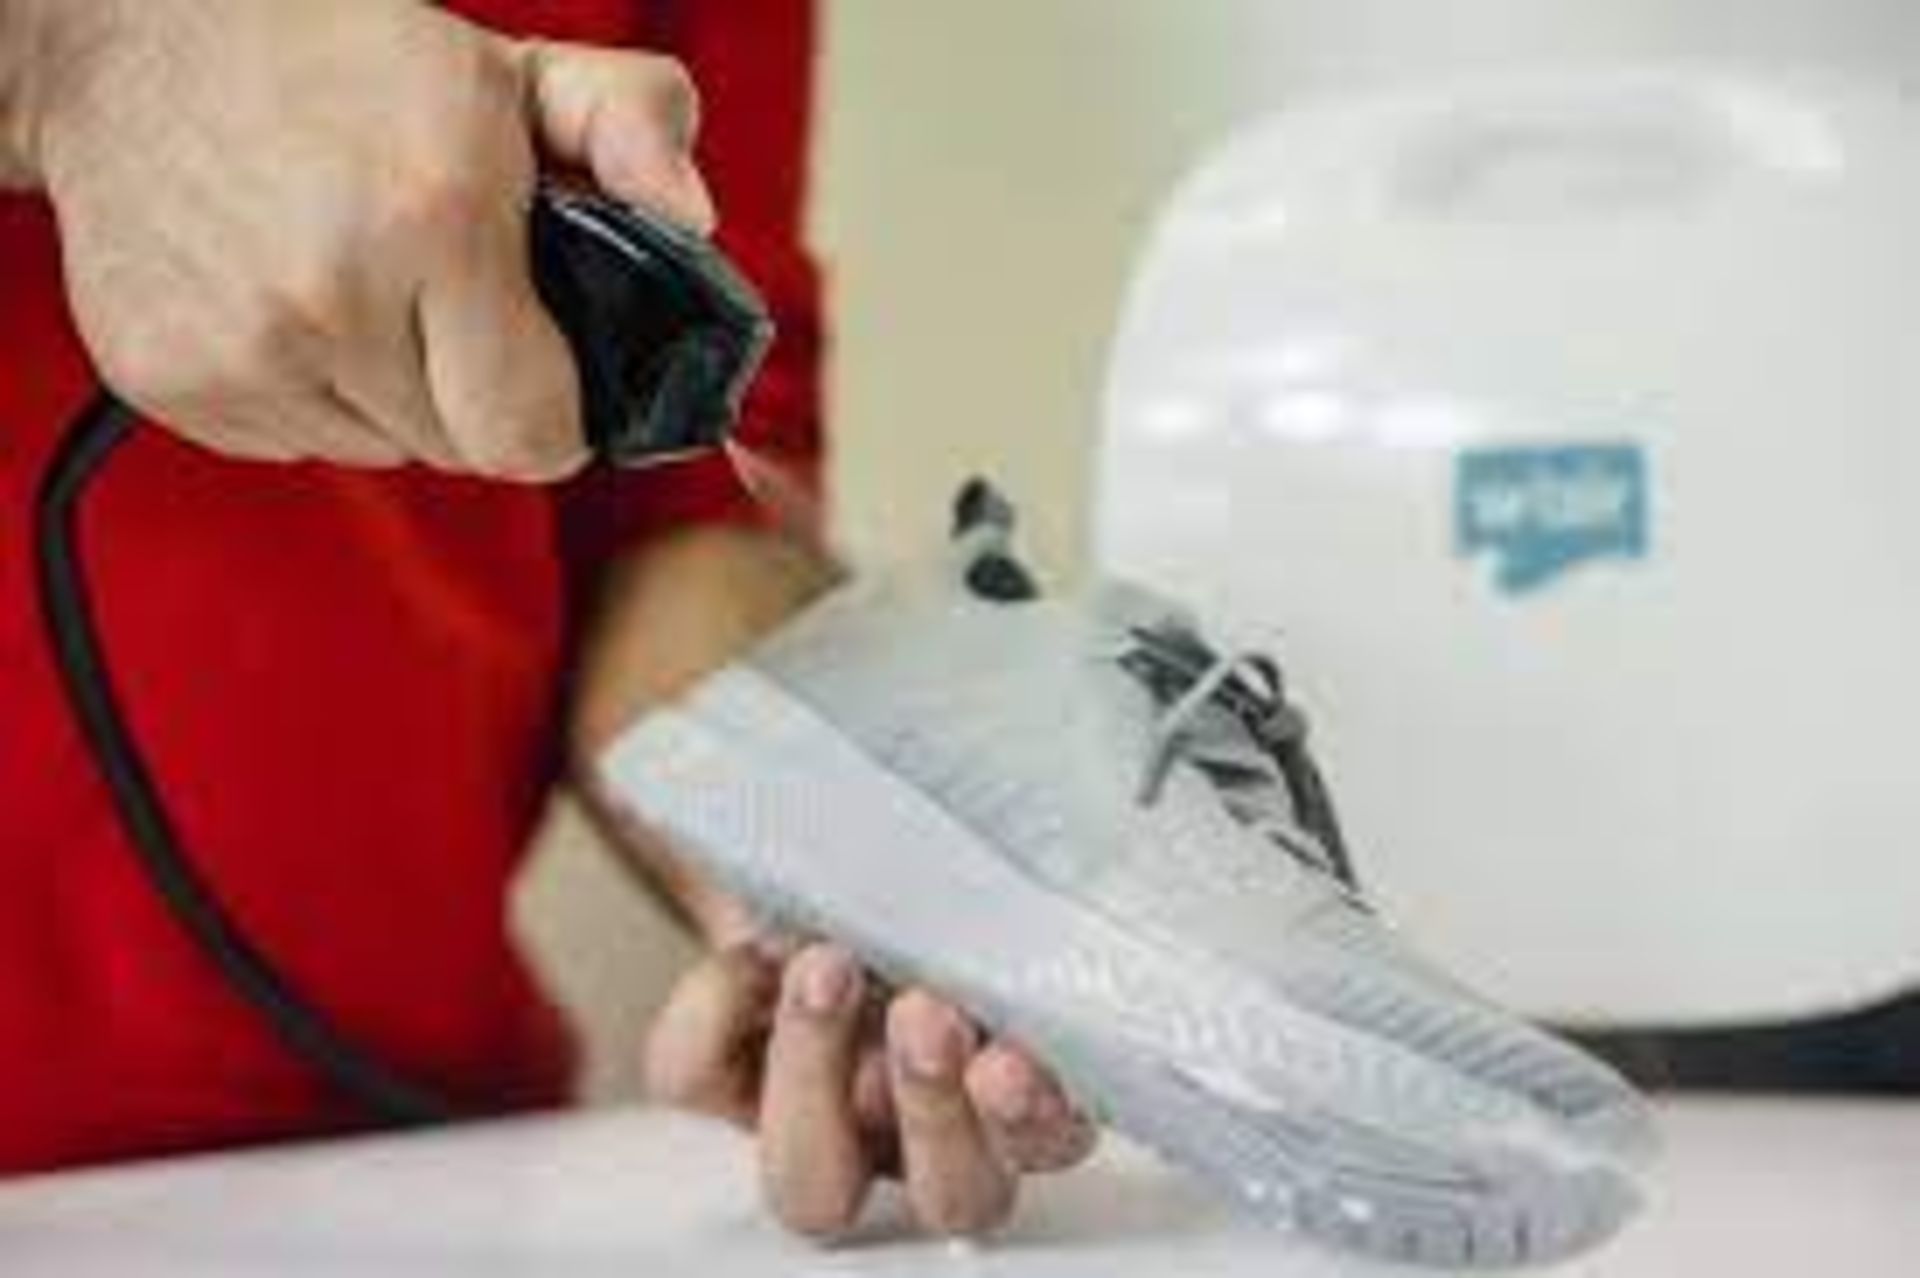 10 X BRAND NEW W'AIR SNEAKER CLEANING SYSTEMS RRP £299, The w'air uses hydrodynamic technology - Image 3 of 6